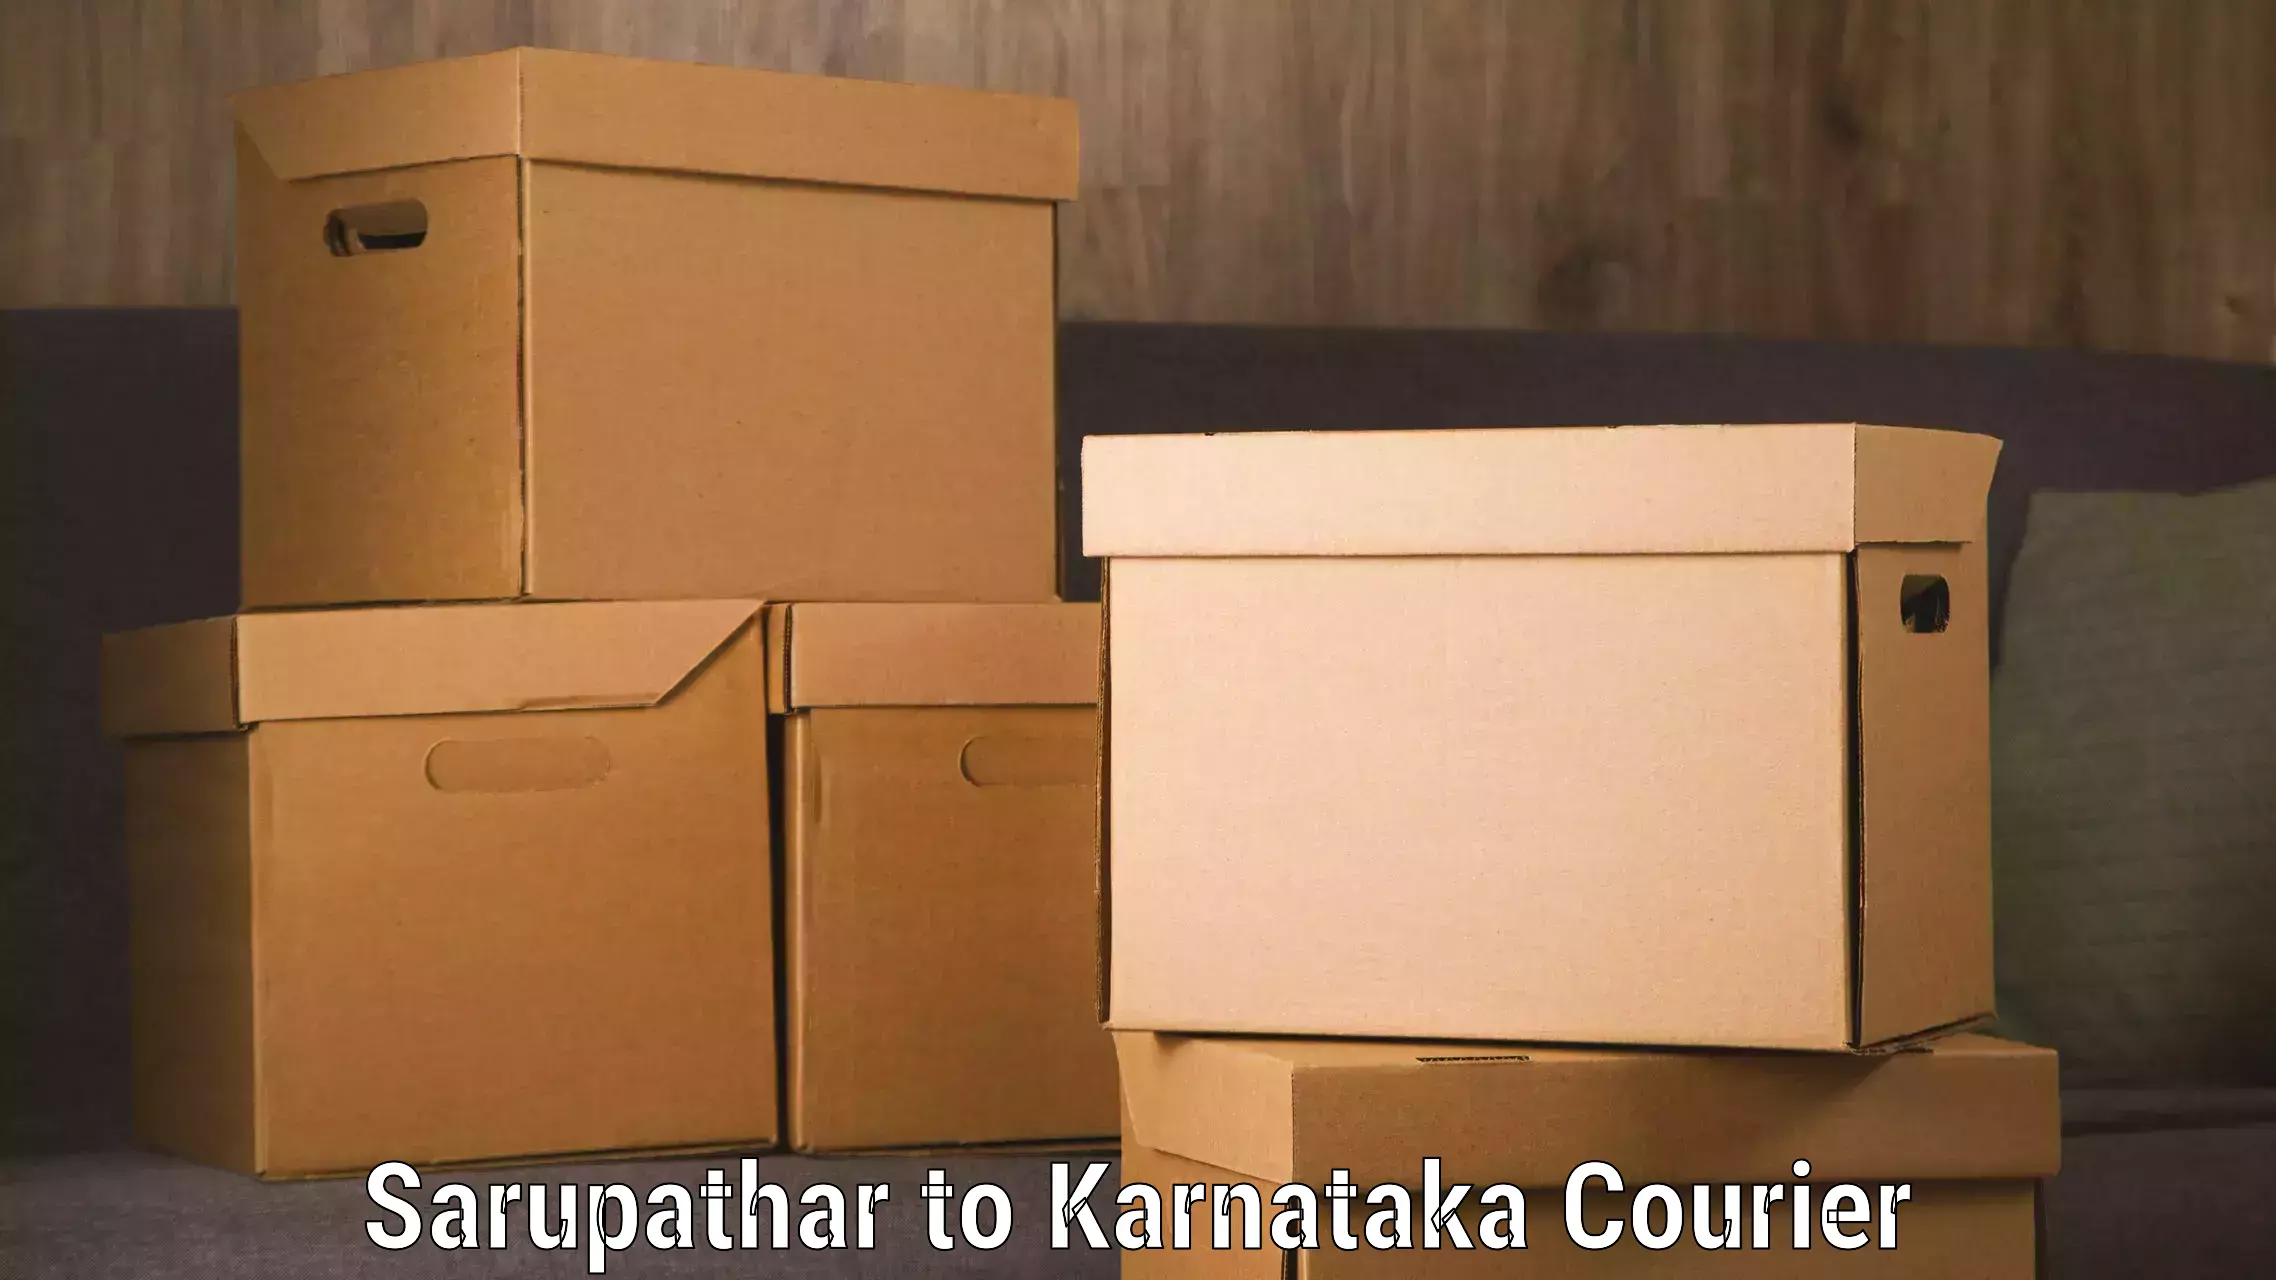 Online luggage shipping booking Sarupathar to Manipal